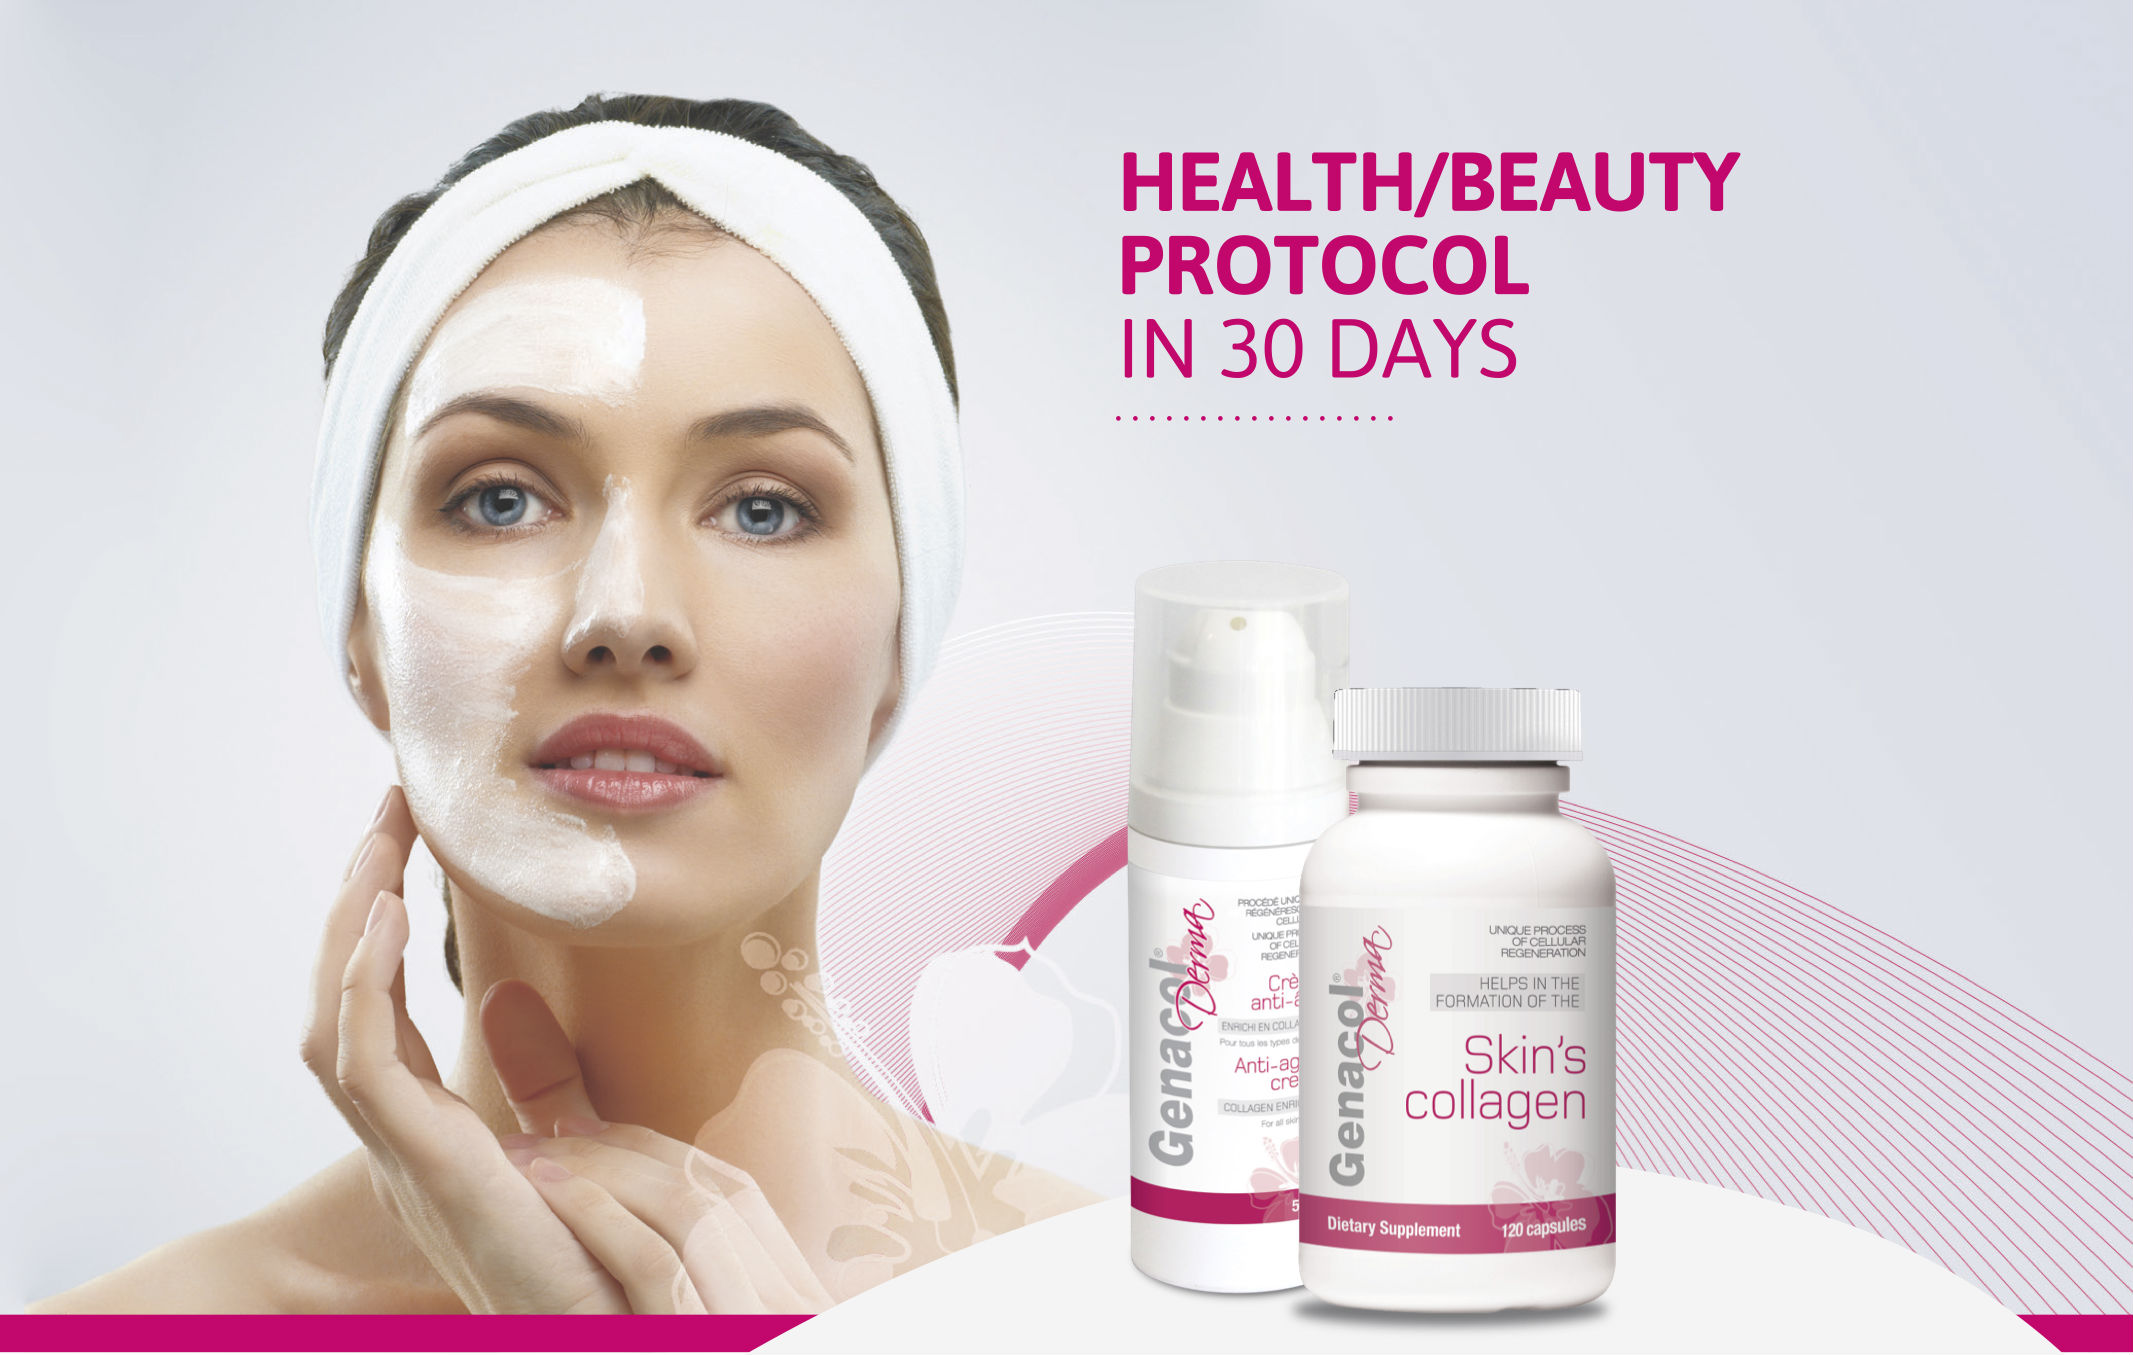 Helps in the formation of the skin's collagen